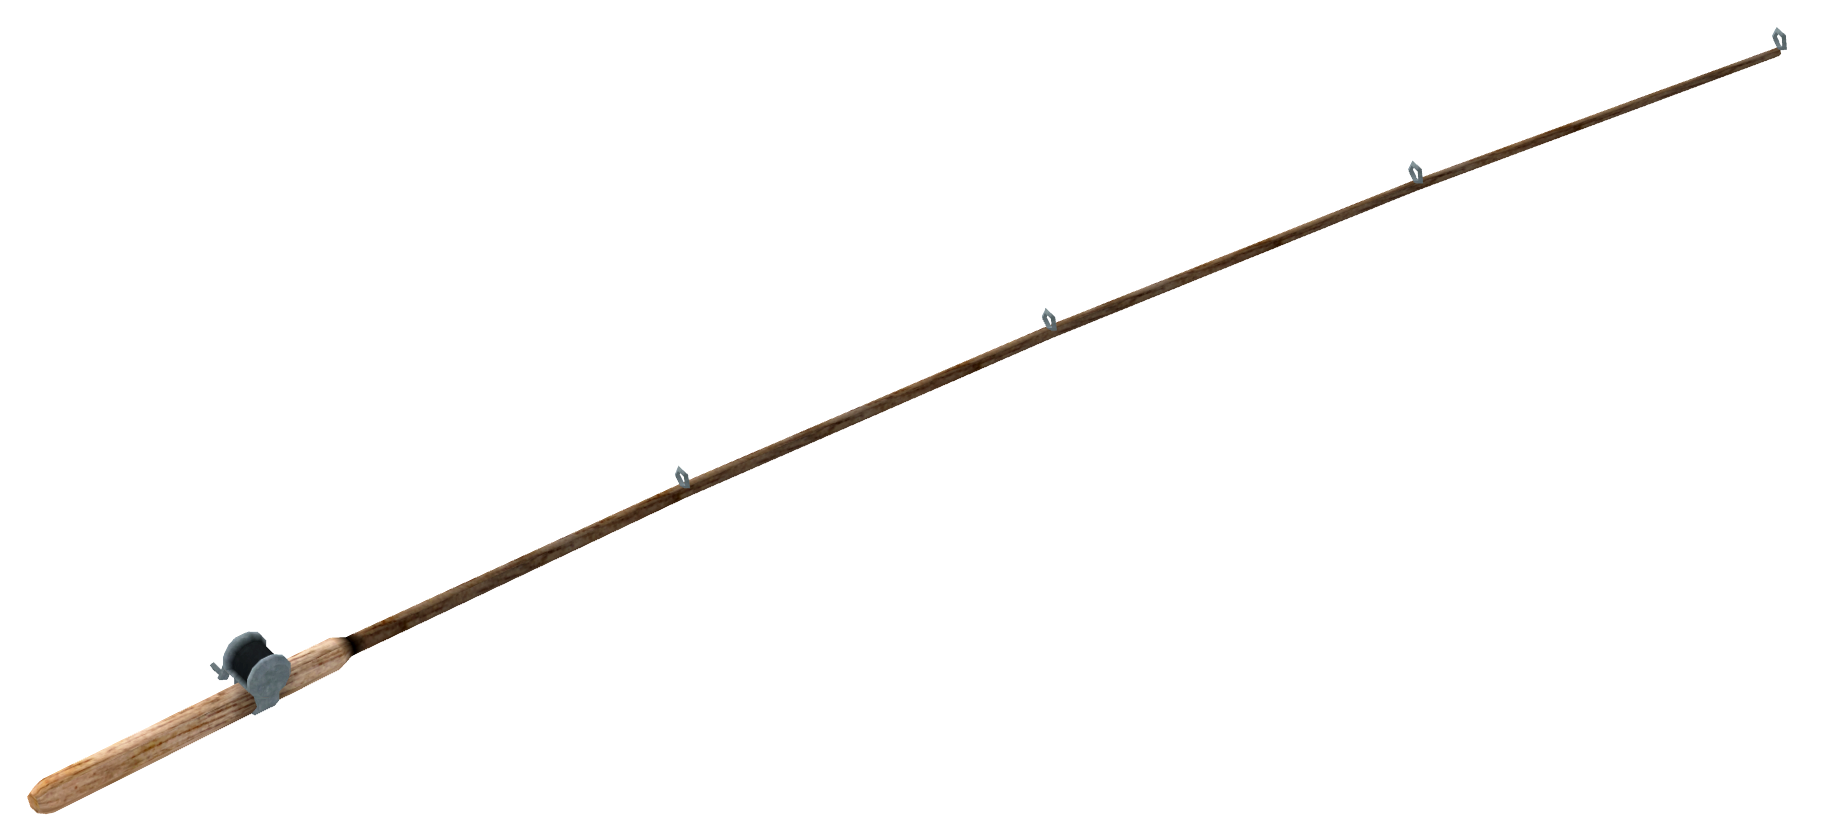 Fishing Pole   The Fallout Wiki   Fallout  New Vegas And More